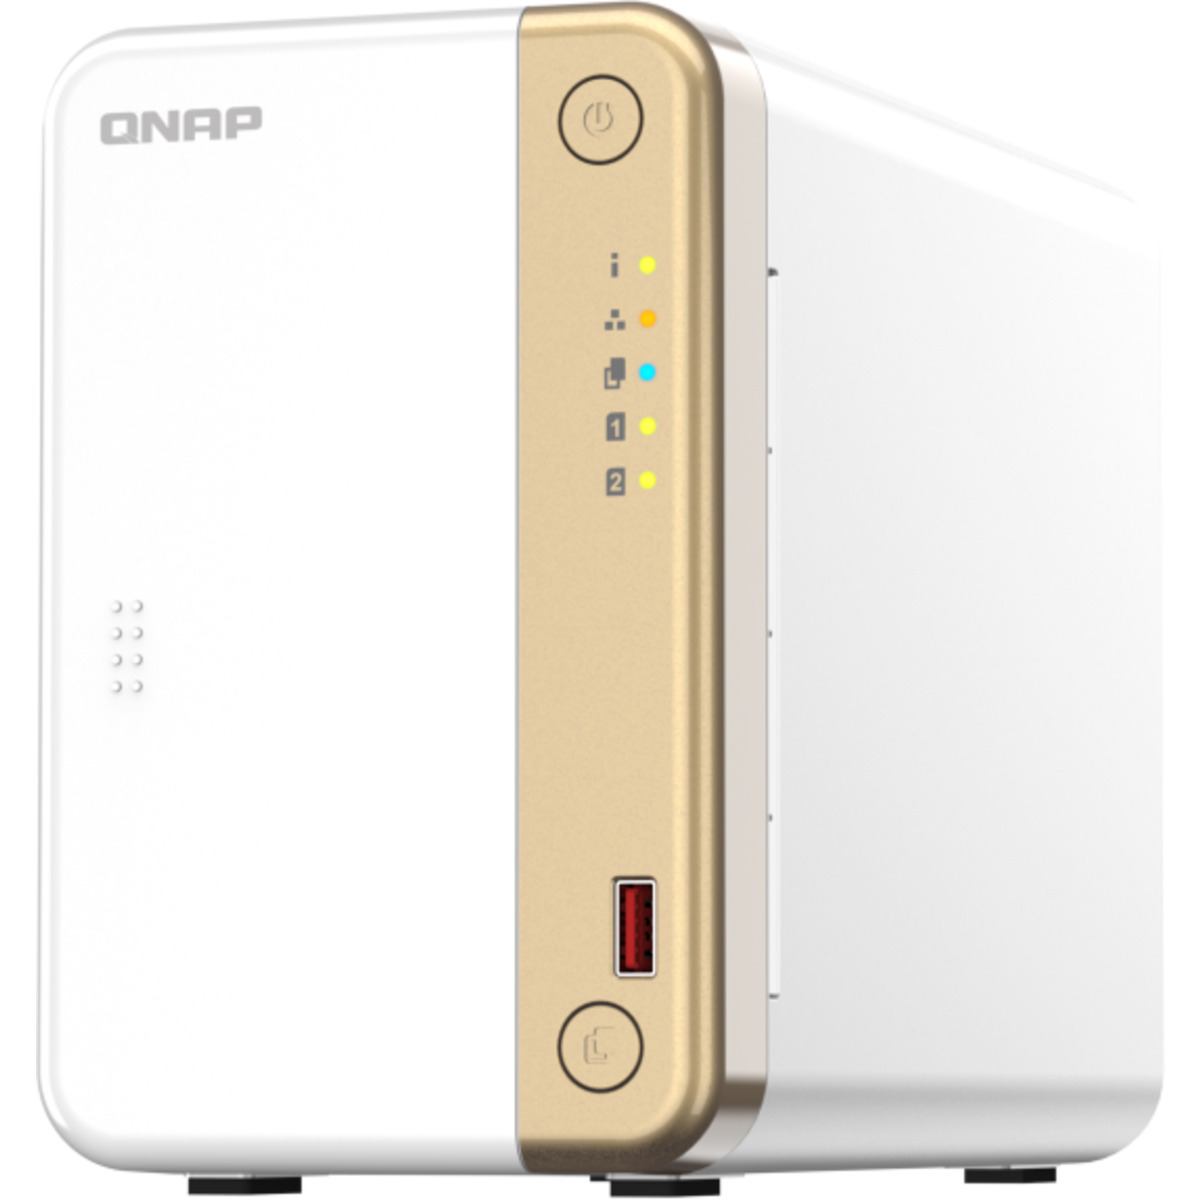 QNAP TS-262 40tb 2-Bay Desktop Personal / Basic Home / Small Office NAS - Network Attached Storage Device 2x20tb Western Digital Ultrastar HC560 WUH722020ALE6L4 3.5 7200rpm SATA 6Gb/s HDD ENTERPRISE Class Drives Installed - Burn-In Tested TS-262